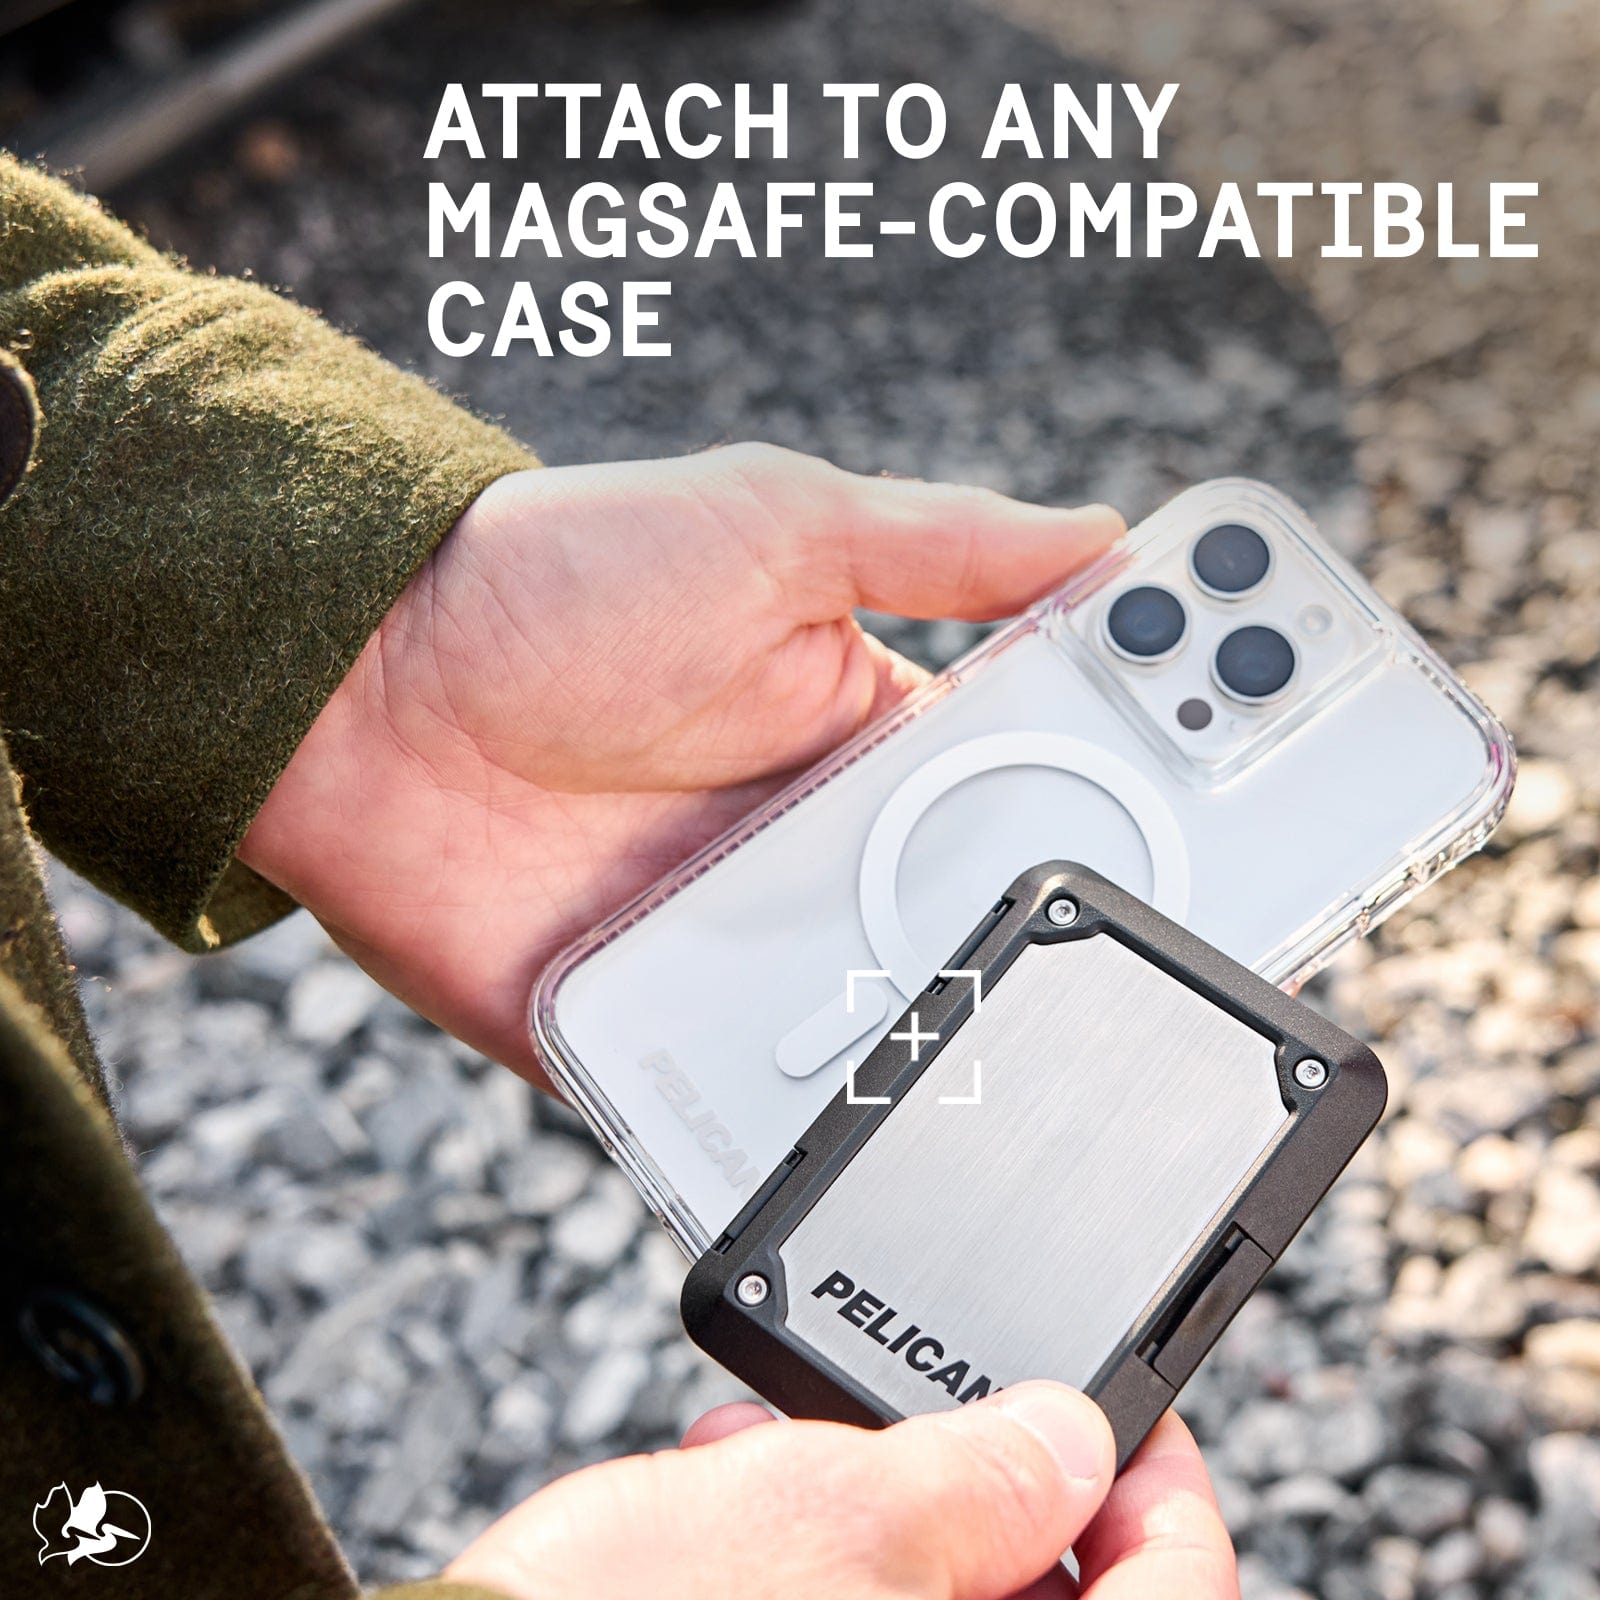 ATTACH TO ANY MAGSAFE COMPATIBLE CASE